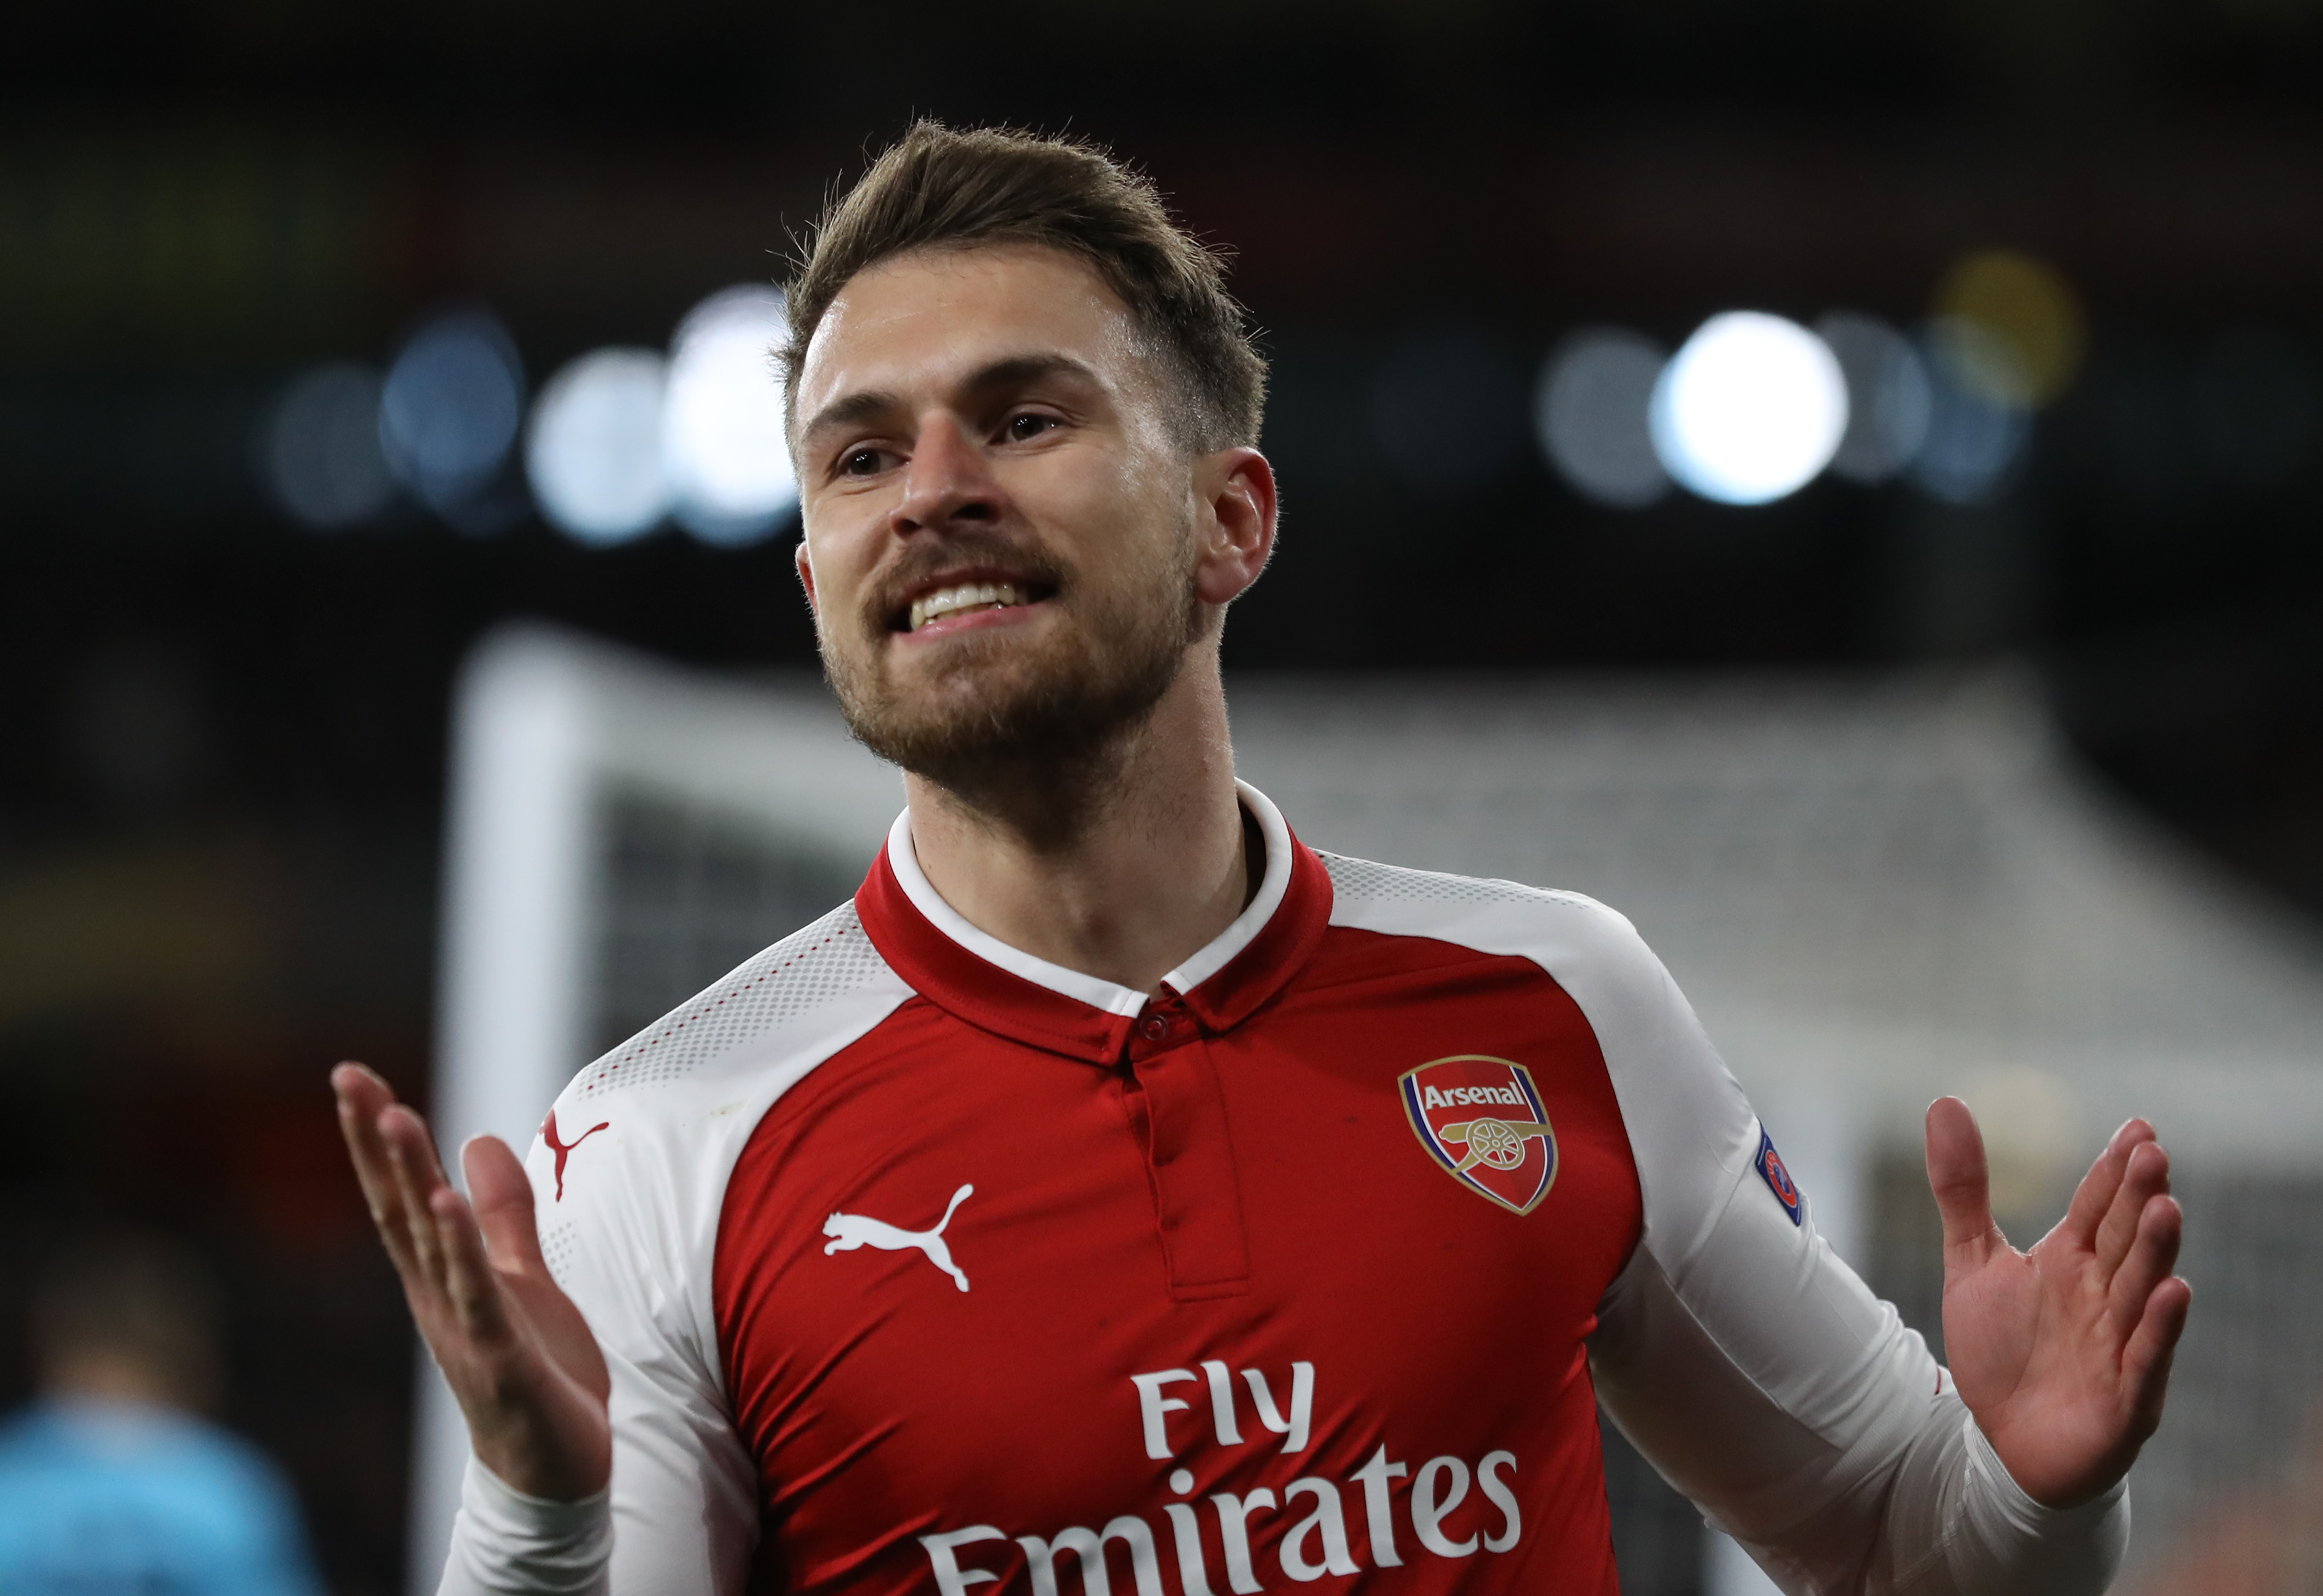 LONDON, ENGLAND - APRIL 05:  Aaron Ramsey of Arsenal reacts after a missed chance during the UEFA Europa League quarter final leg one match between Arsenal FC and CSKA Moskva at Emirates Stadium on April 5, 2018 in London, United Kingdom.  (Photo by Dan Istitene/Getty Images,)